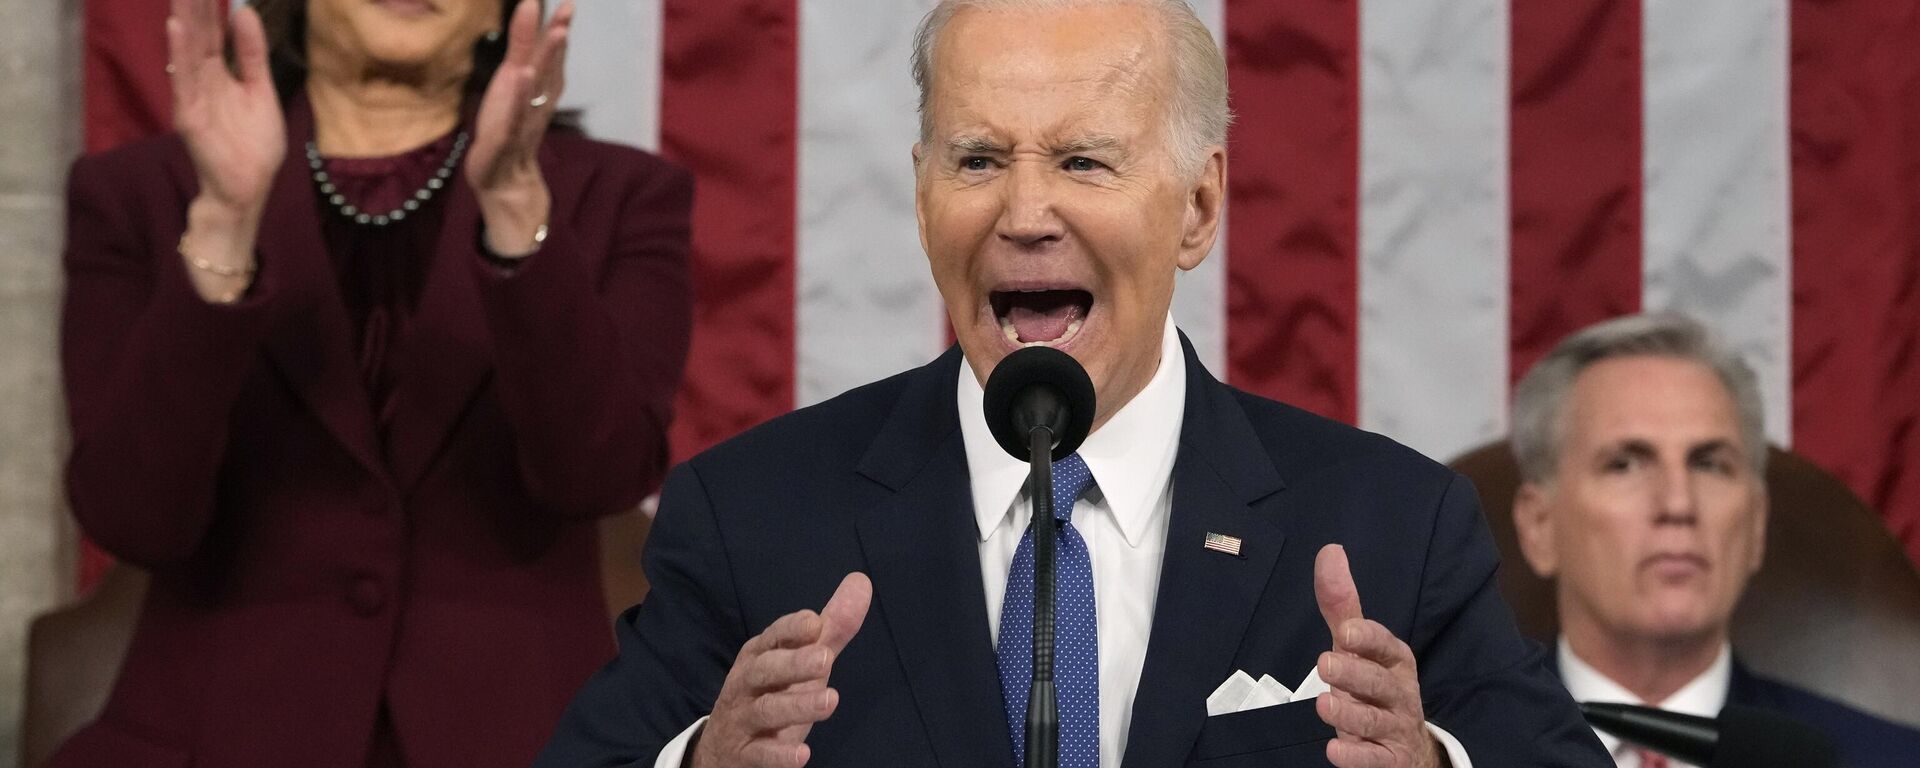 President Joe Biden talks about passing an assault weapons band as he delivers the State of the Union address to a joint session of Congress at the U.S. Capitol, Tuesday, Feb. 7, 2023, in Washington. - Sputnik International, 1920, 02.05.2023